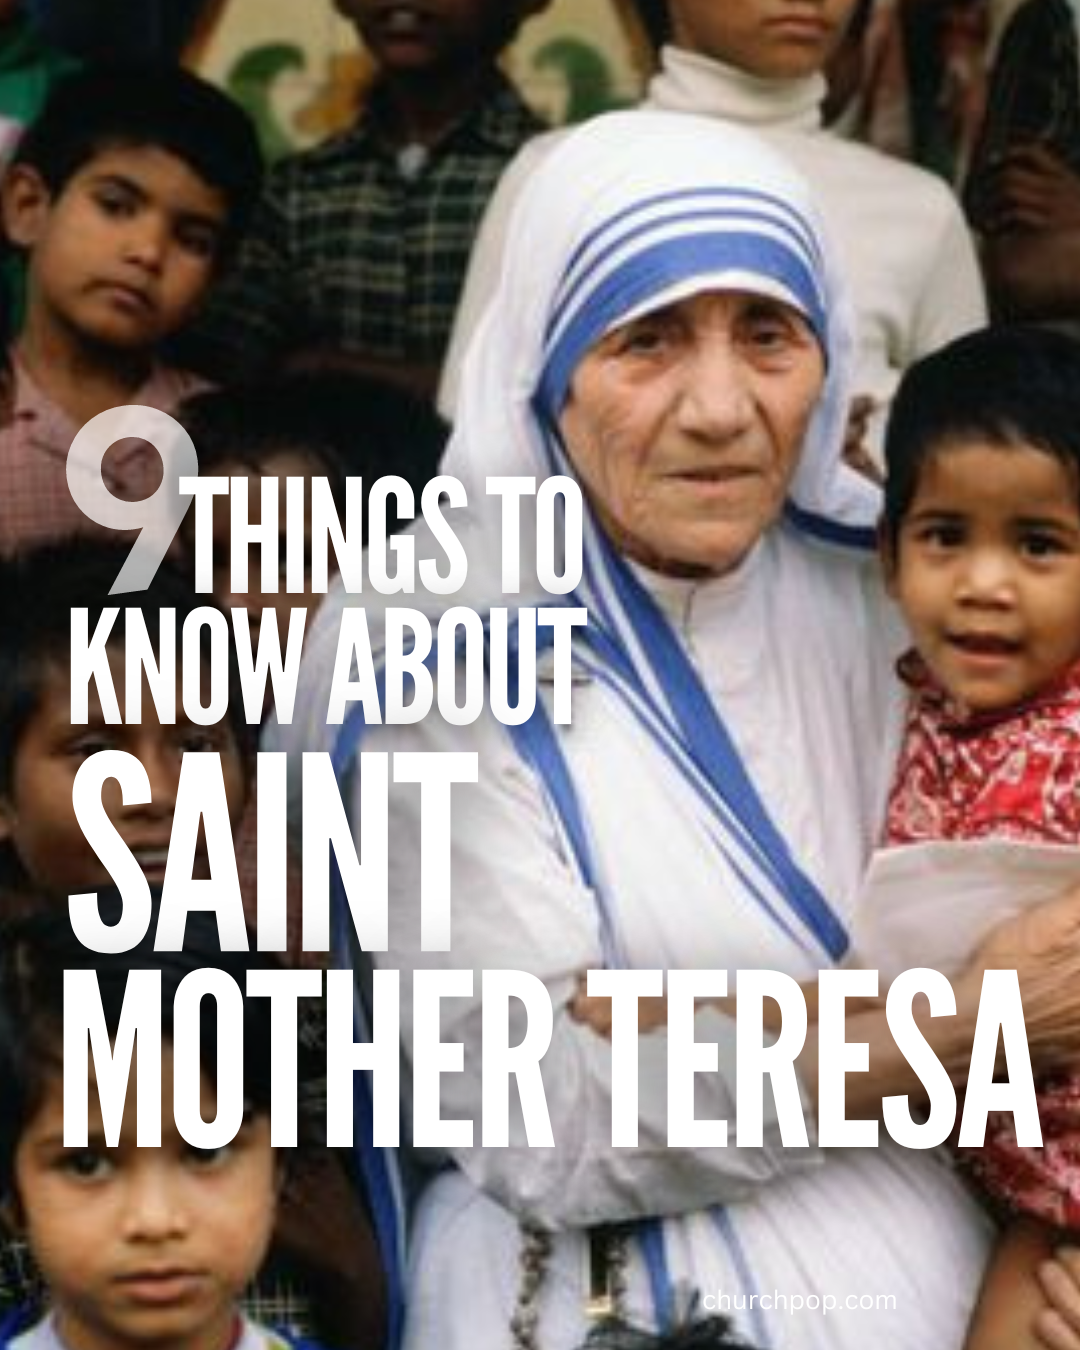 9 Facts About The Amazing Life Of Saint Mother Teresa Every Catholic Should Know